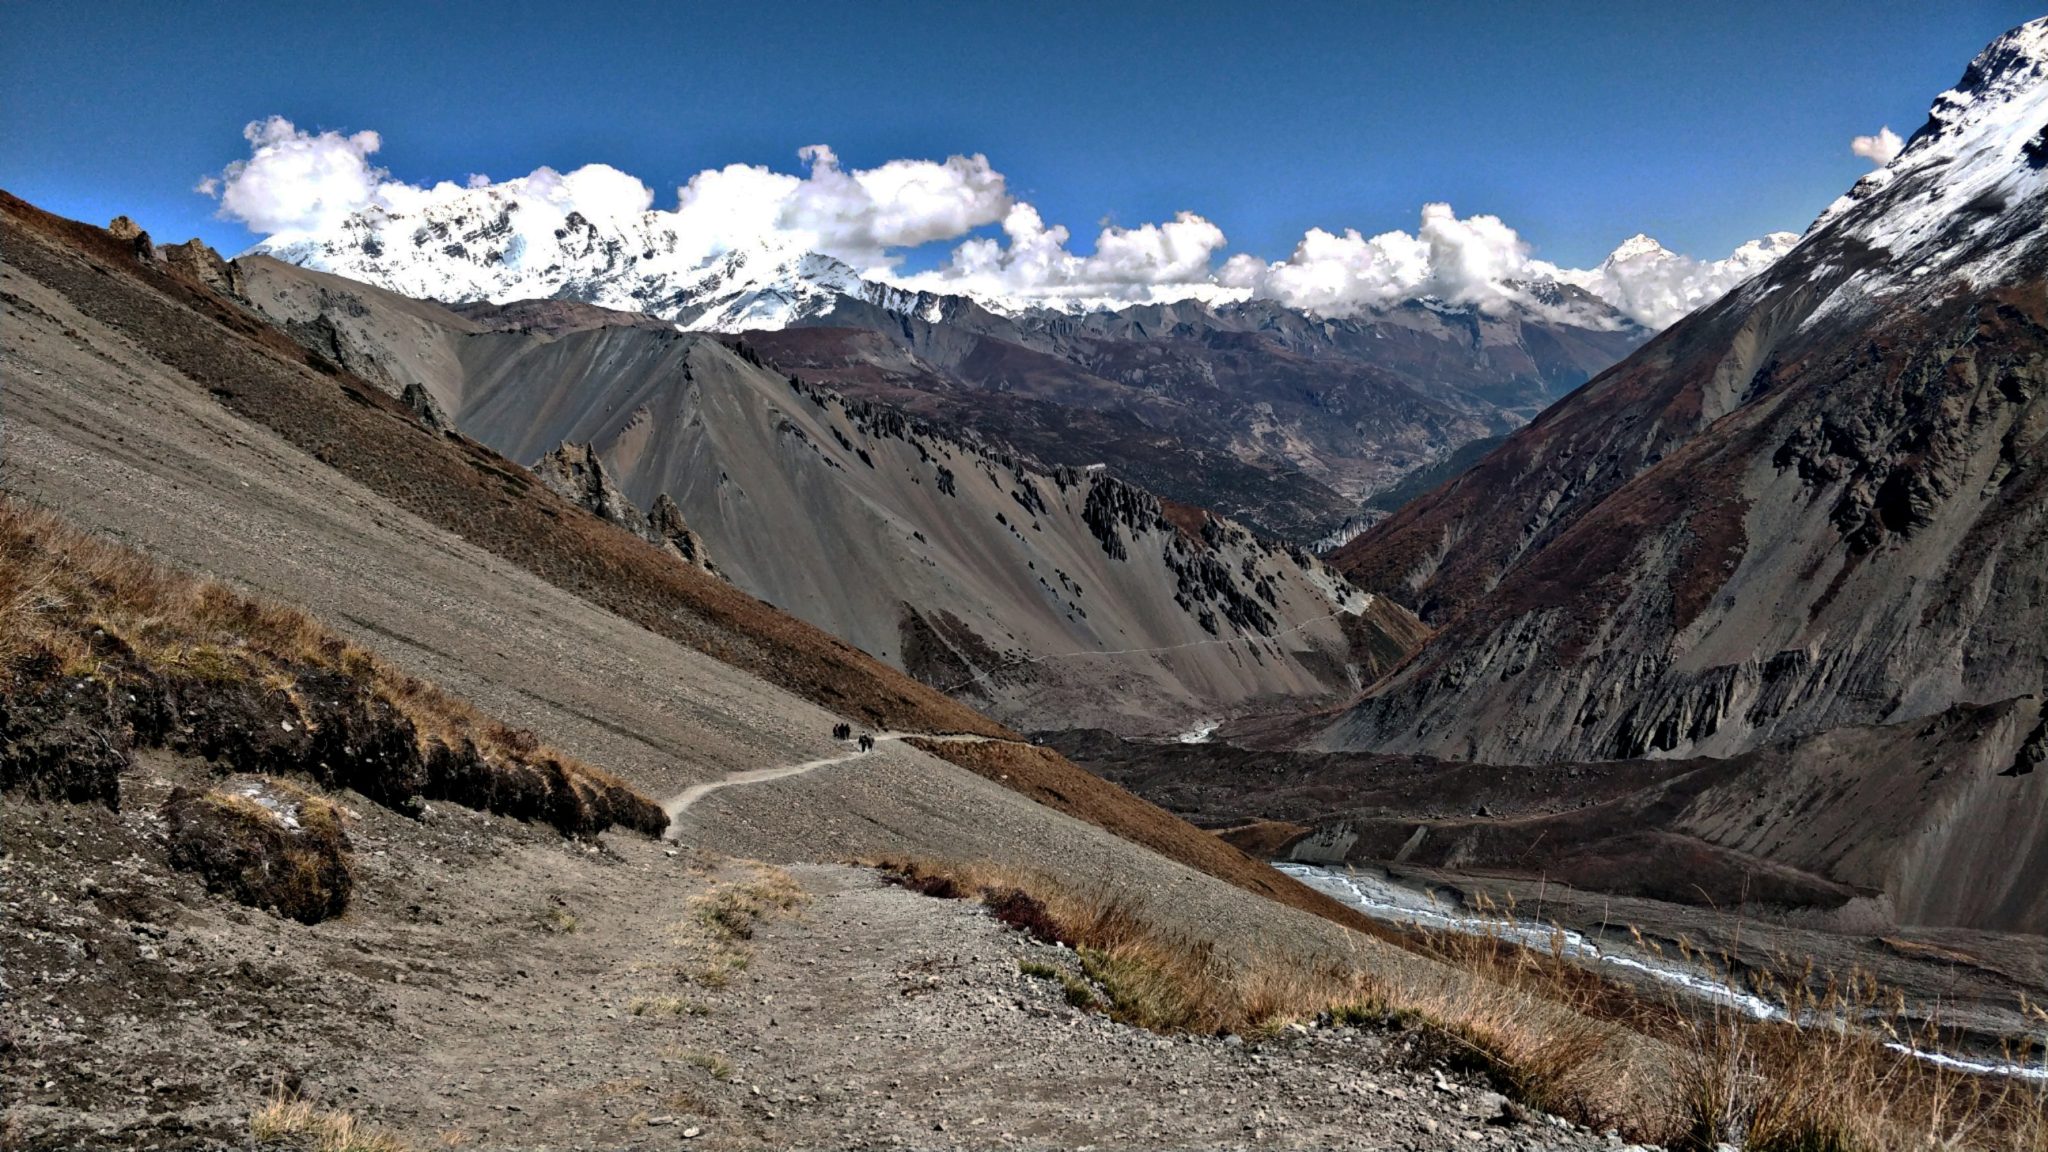 Trek trail on the way to Tilicho Lake in Nepal.